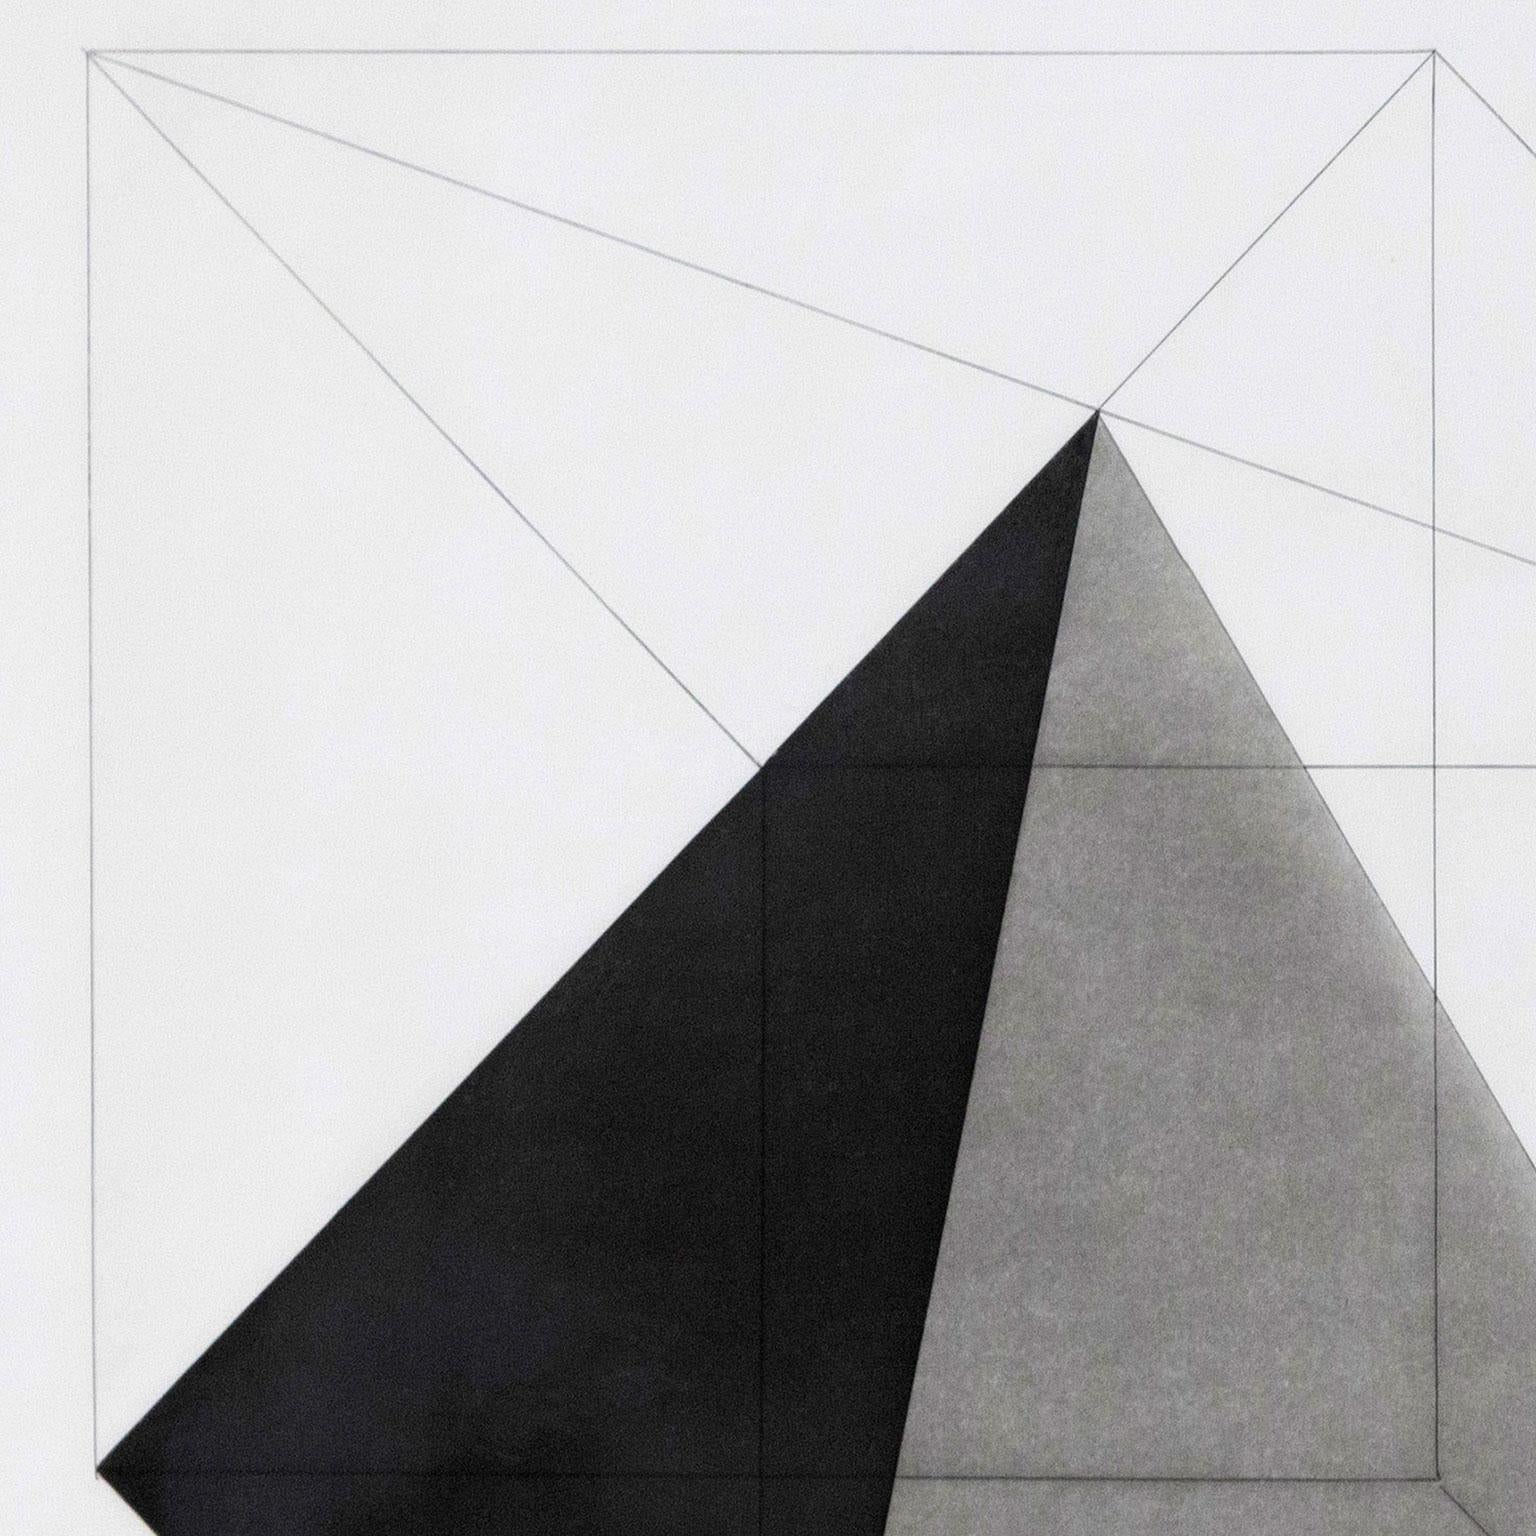 Sol LeWitt (1928-2007) is an important contributor to the 20th century's most cerebral 